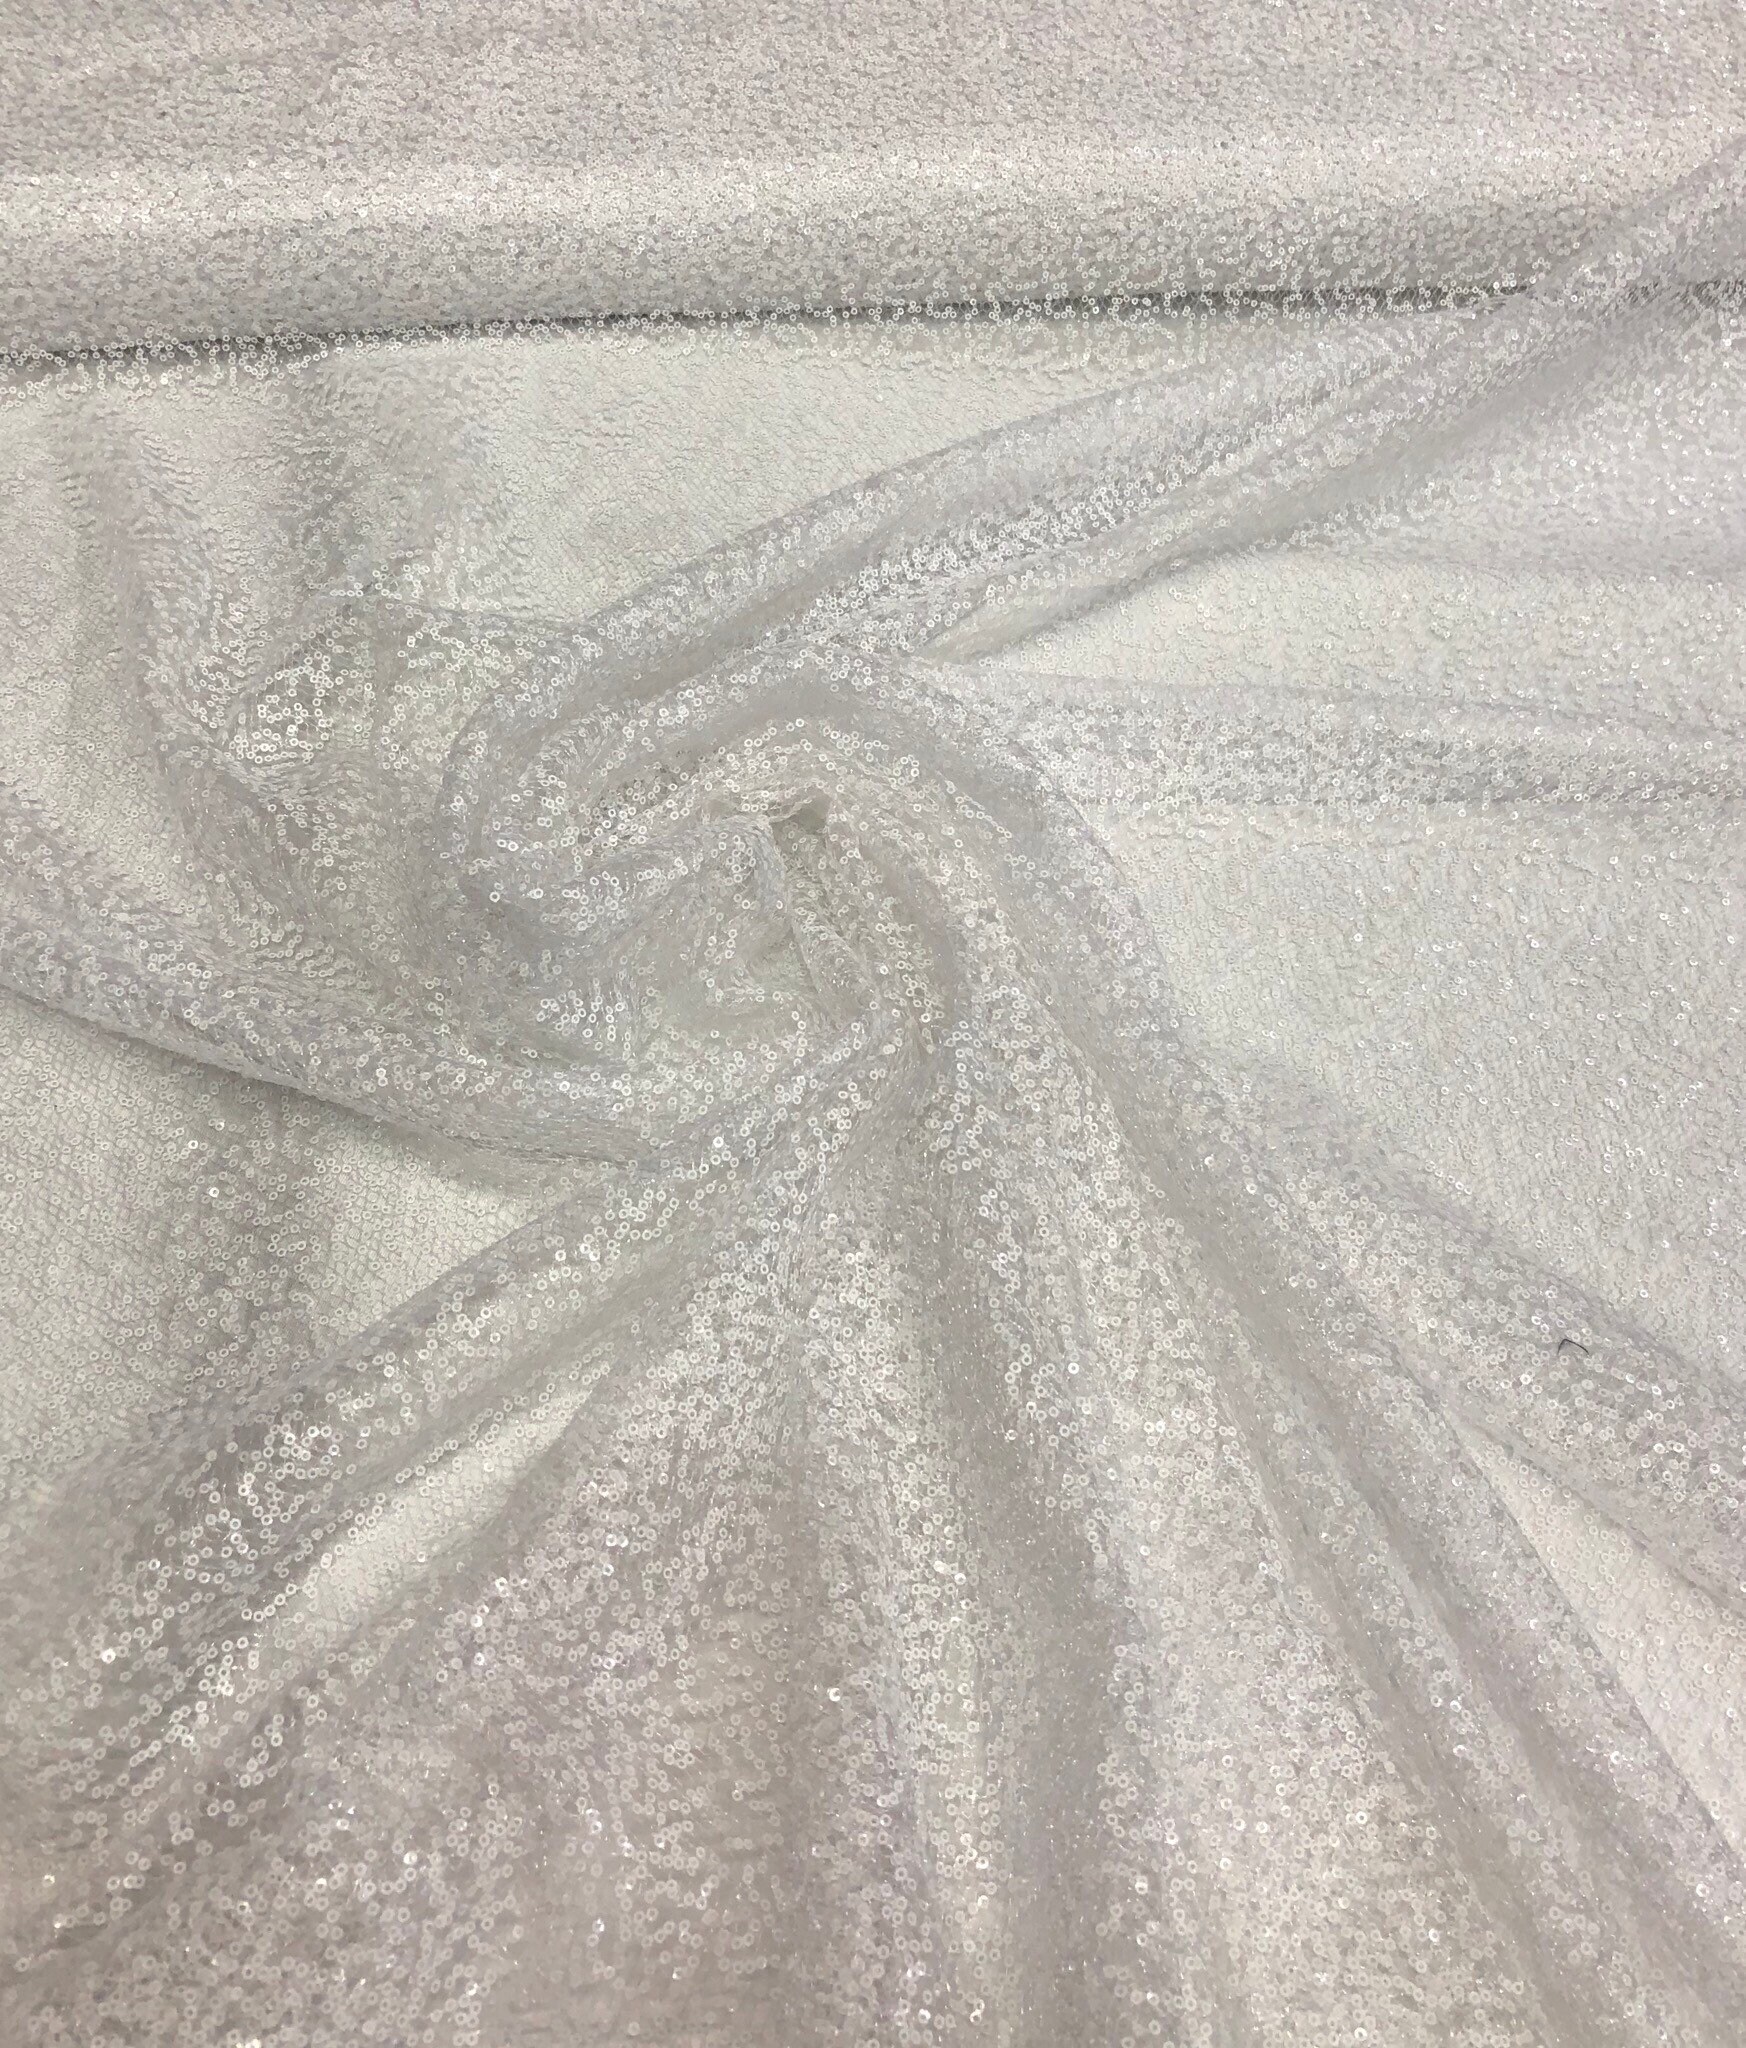 White sequins on sheer swirl mesh 52 wide Sequins fabric sold by the yard